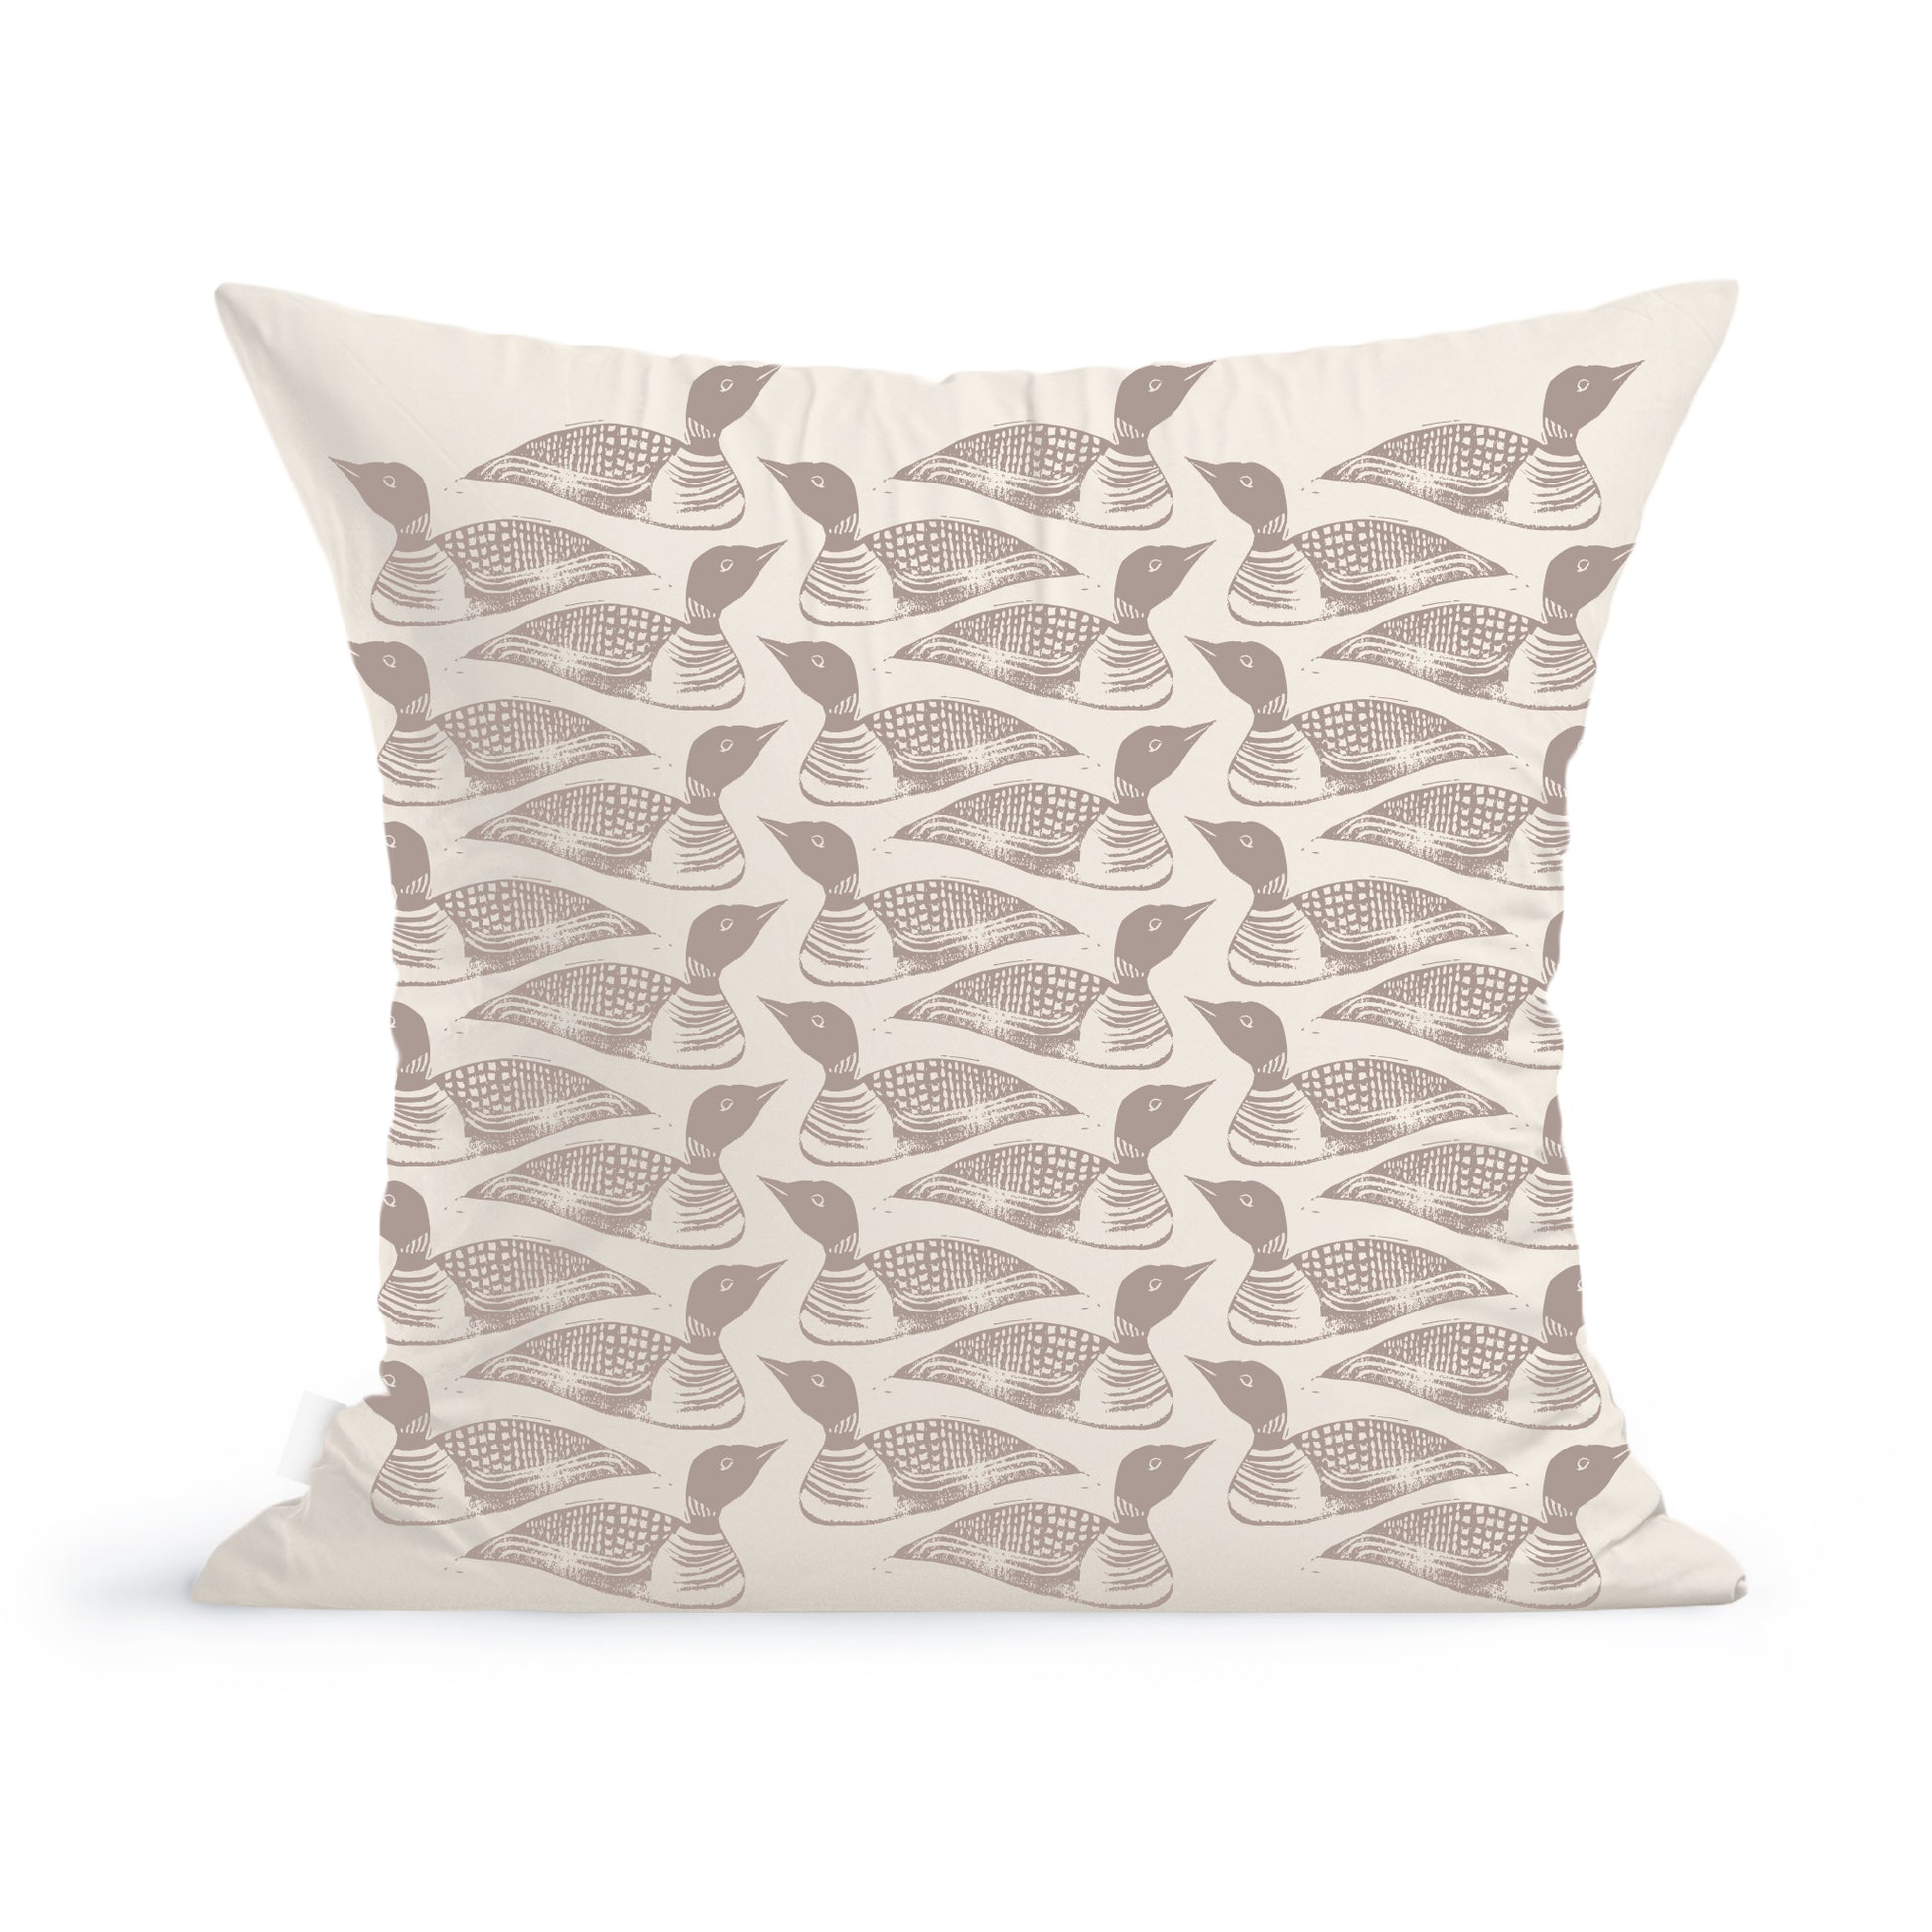 Rustic County's Little Loons pillow cover features a repeating pattern of stylized brown ducks against a light beige background. Each duck is depicted in a side profile with detailed feathers.